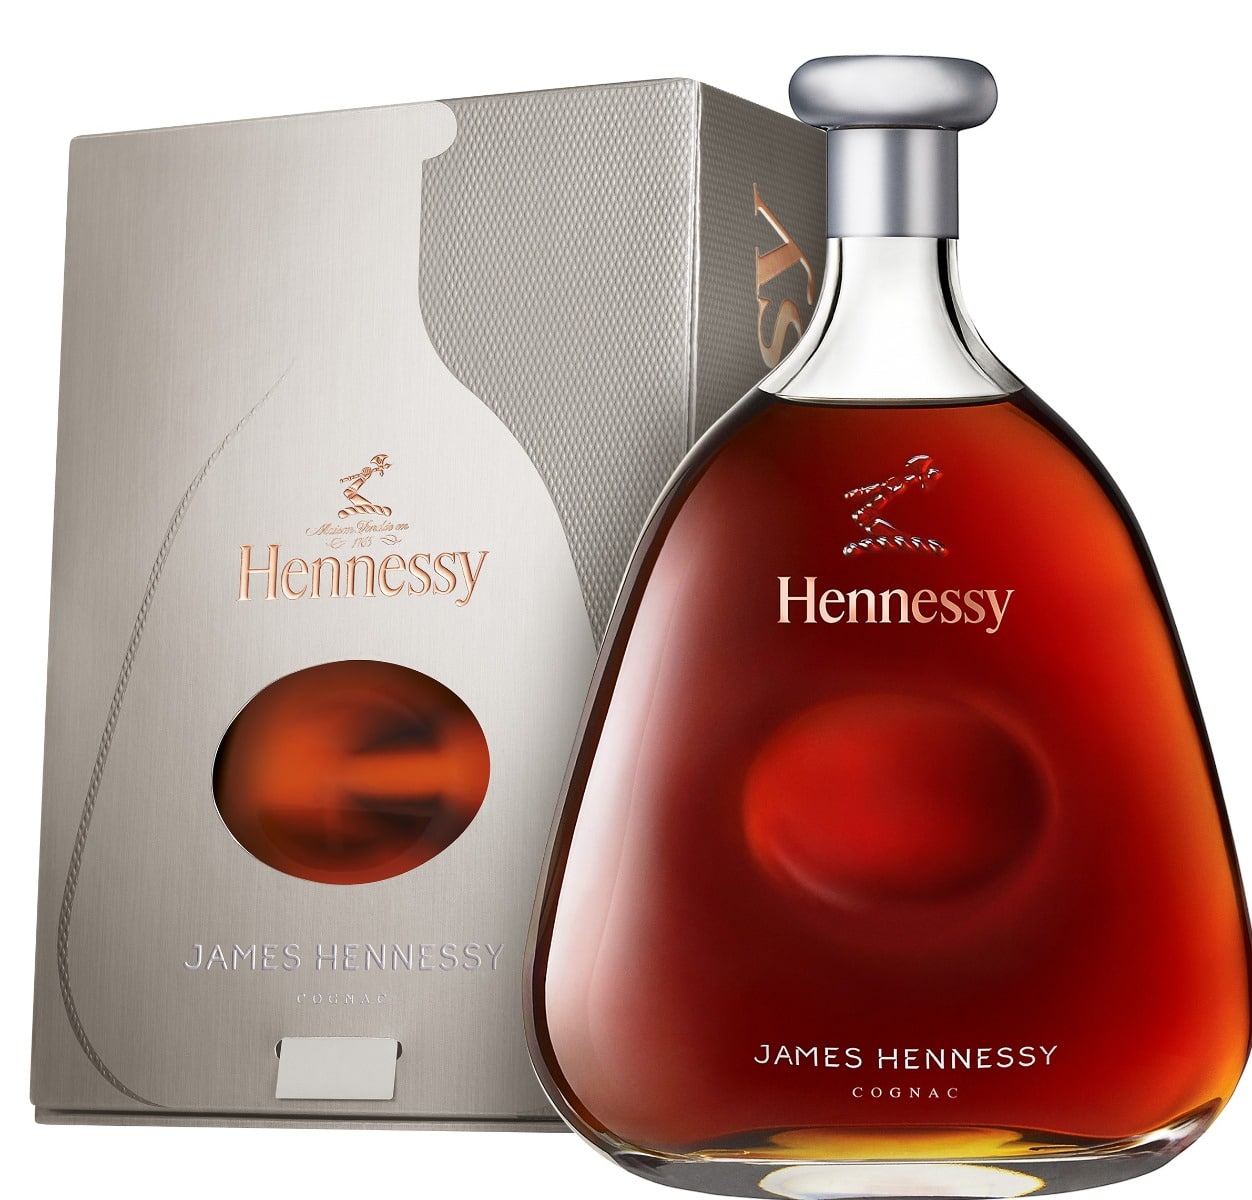 Henessy James Henessy Cognac Gift Box 40% 100CL